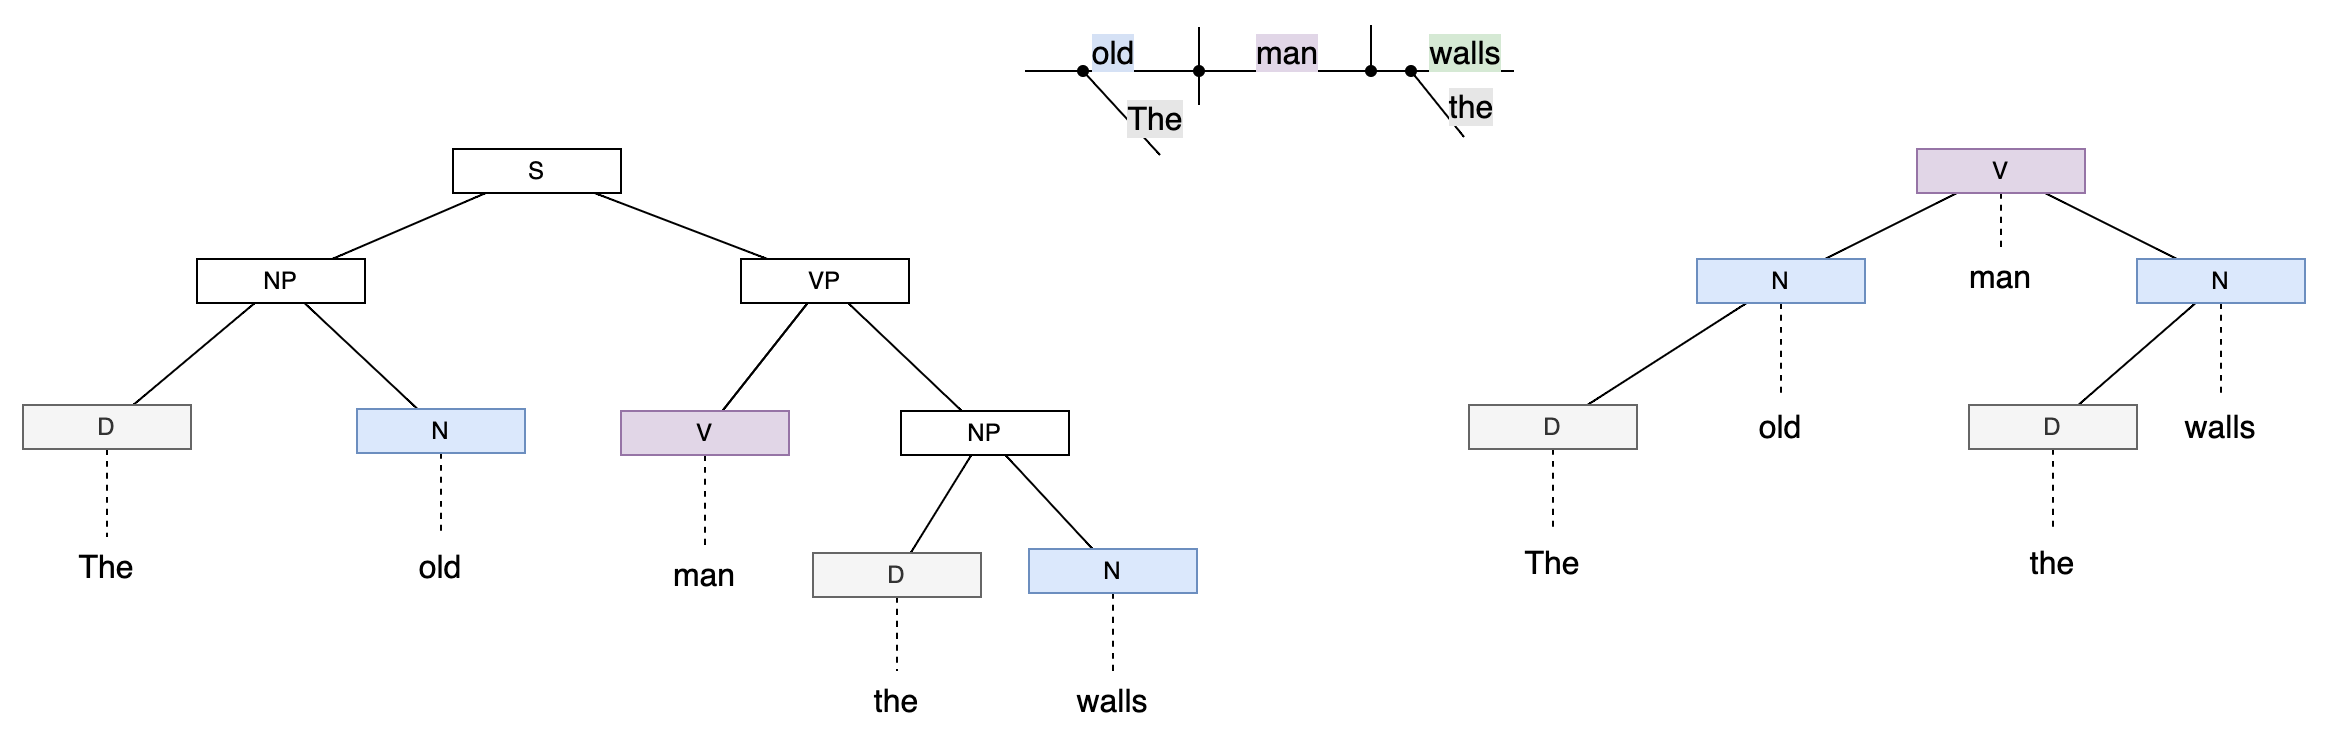 Sentence trees are constructed to show either a constituency relation (left) or dependency relation (right)